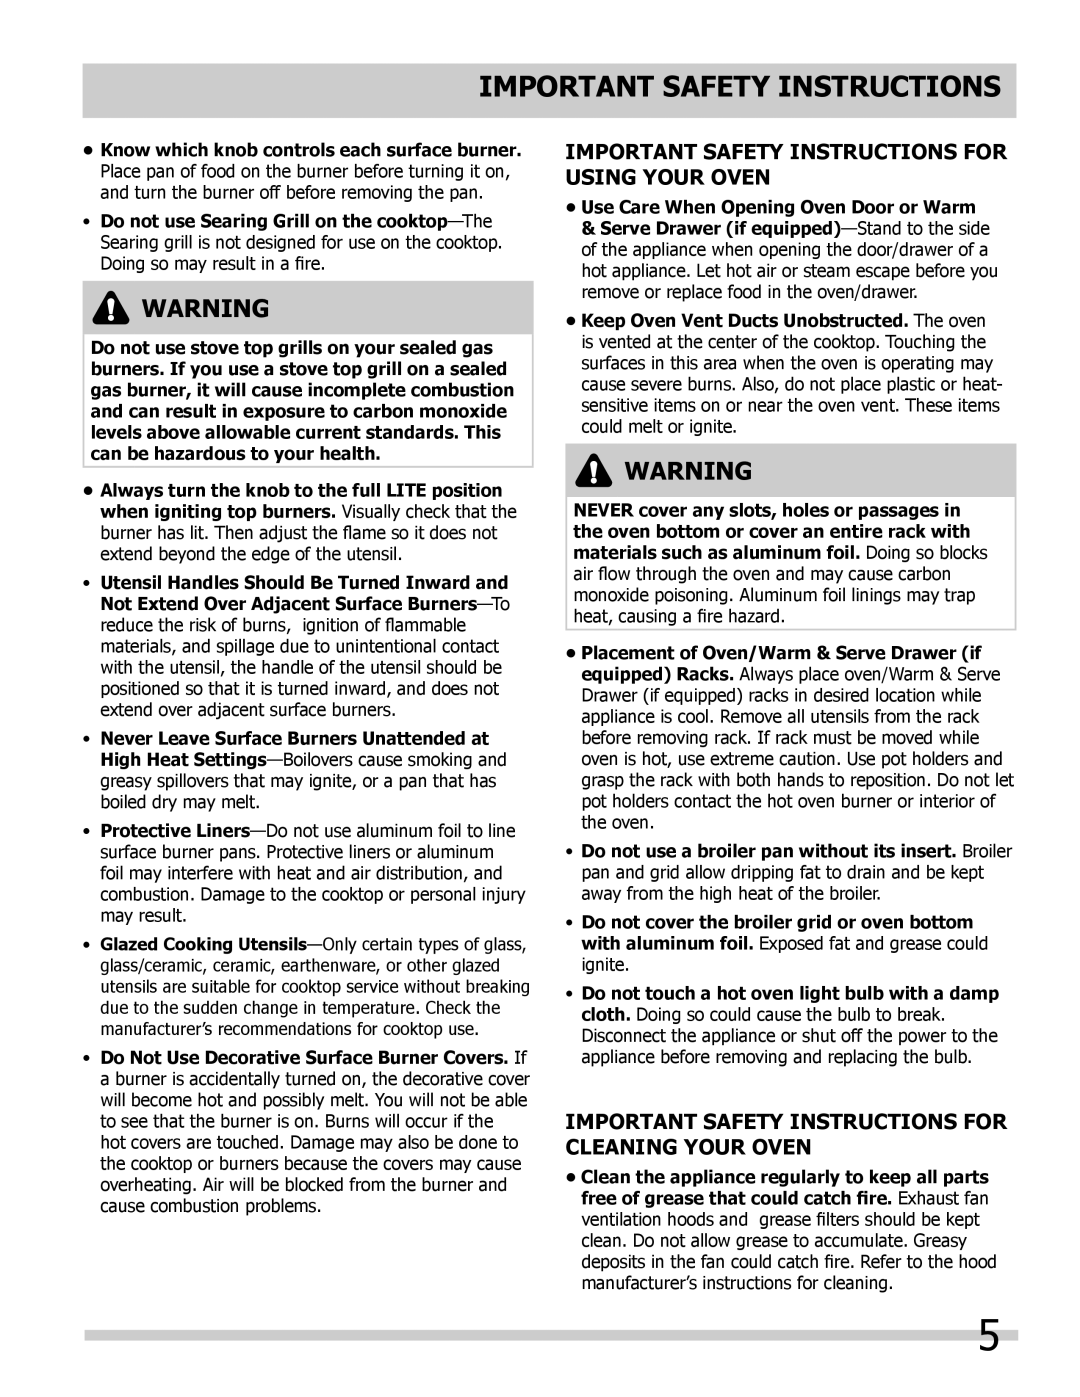 Frigidaire FGDS3065KW Important Safety Instructions For Using Your Oven, Know which knob controls each surface burner 